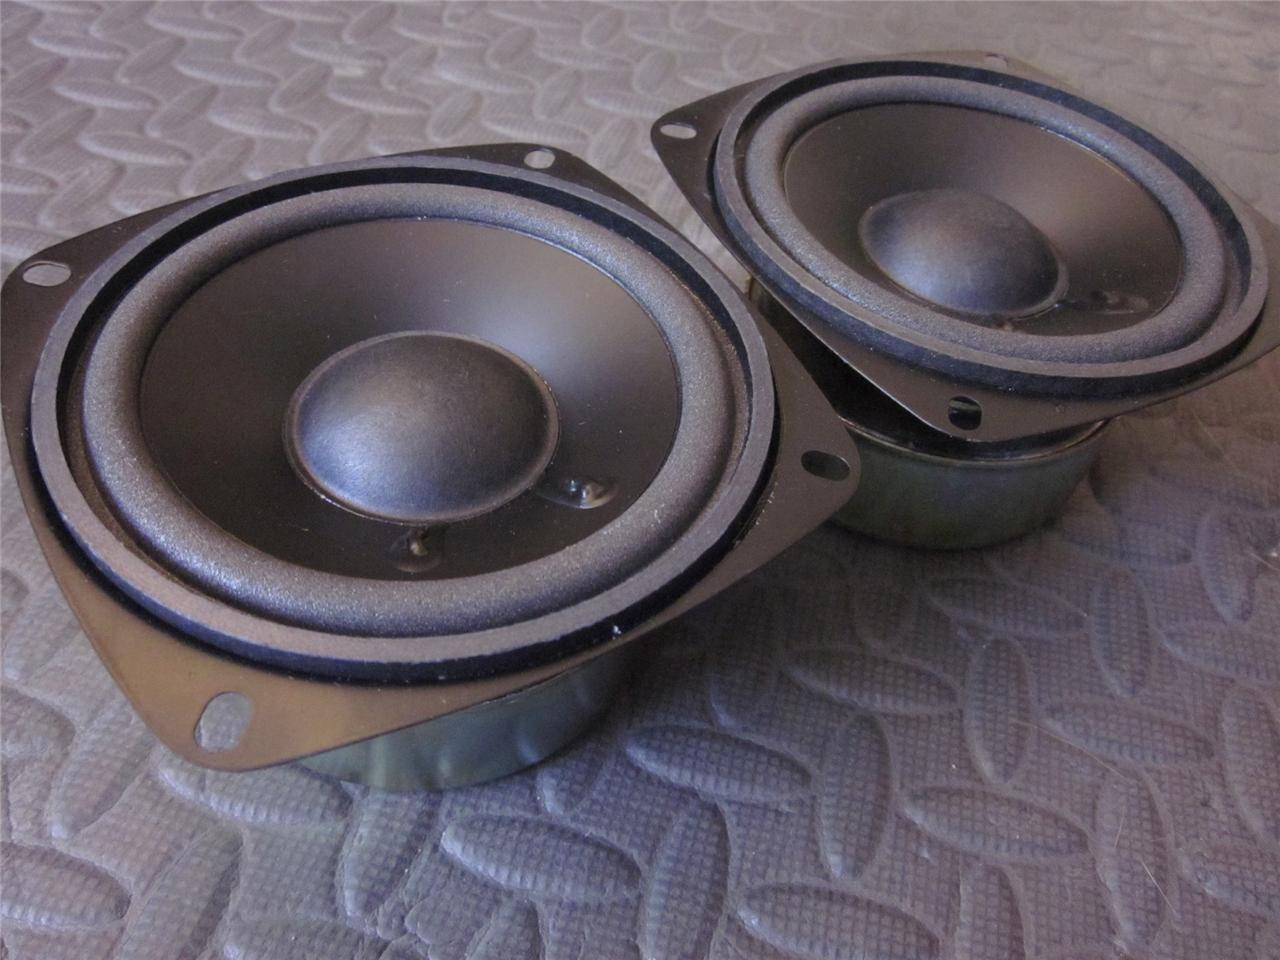 NEW (2) 4" Woofer Speakers.Shielded.8ohm.Pin Cushion four inch.Replacement.PAIR Goldwood koss.m60.m65.m80.m90.m125.4inch.4in.